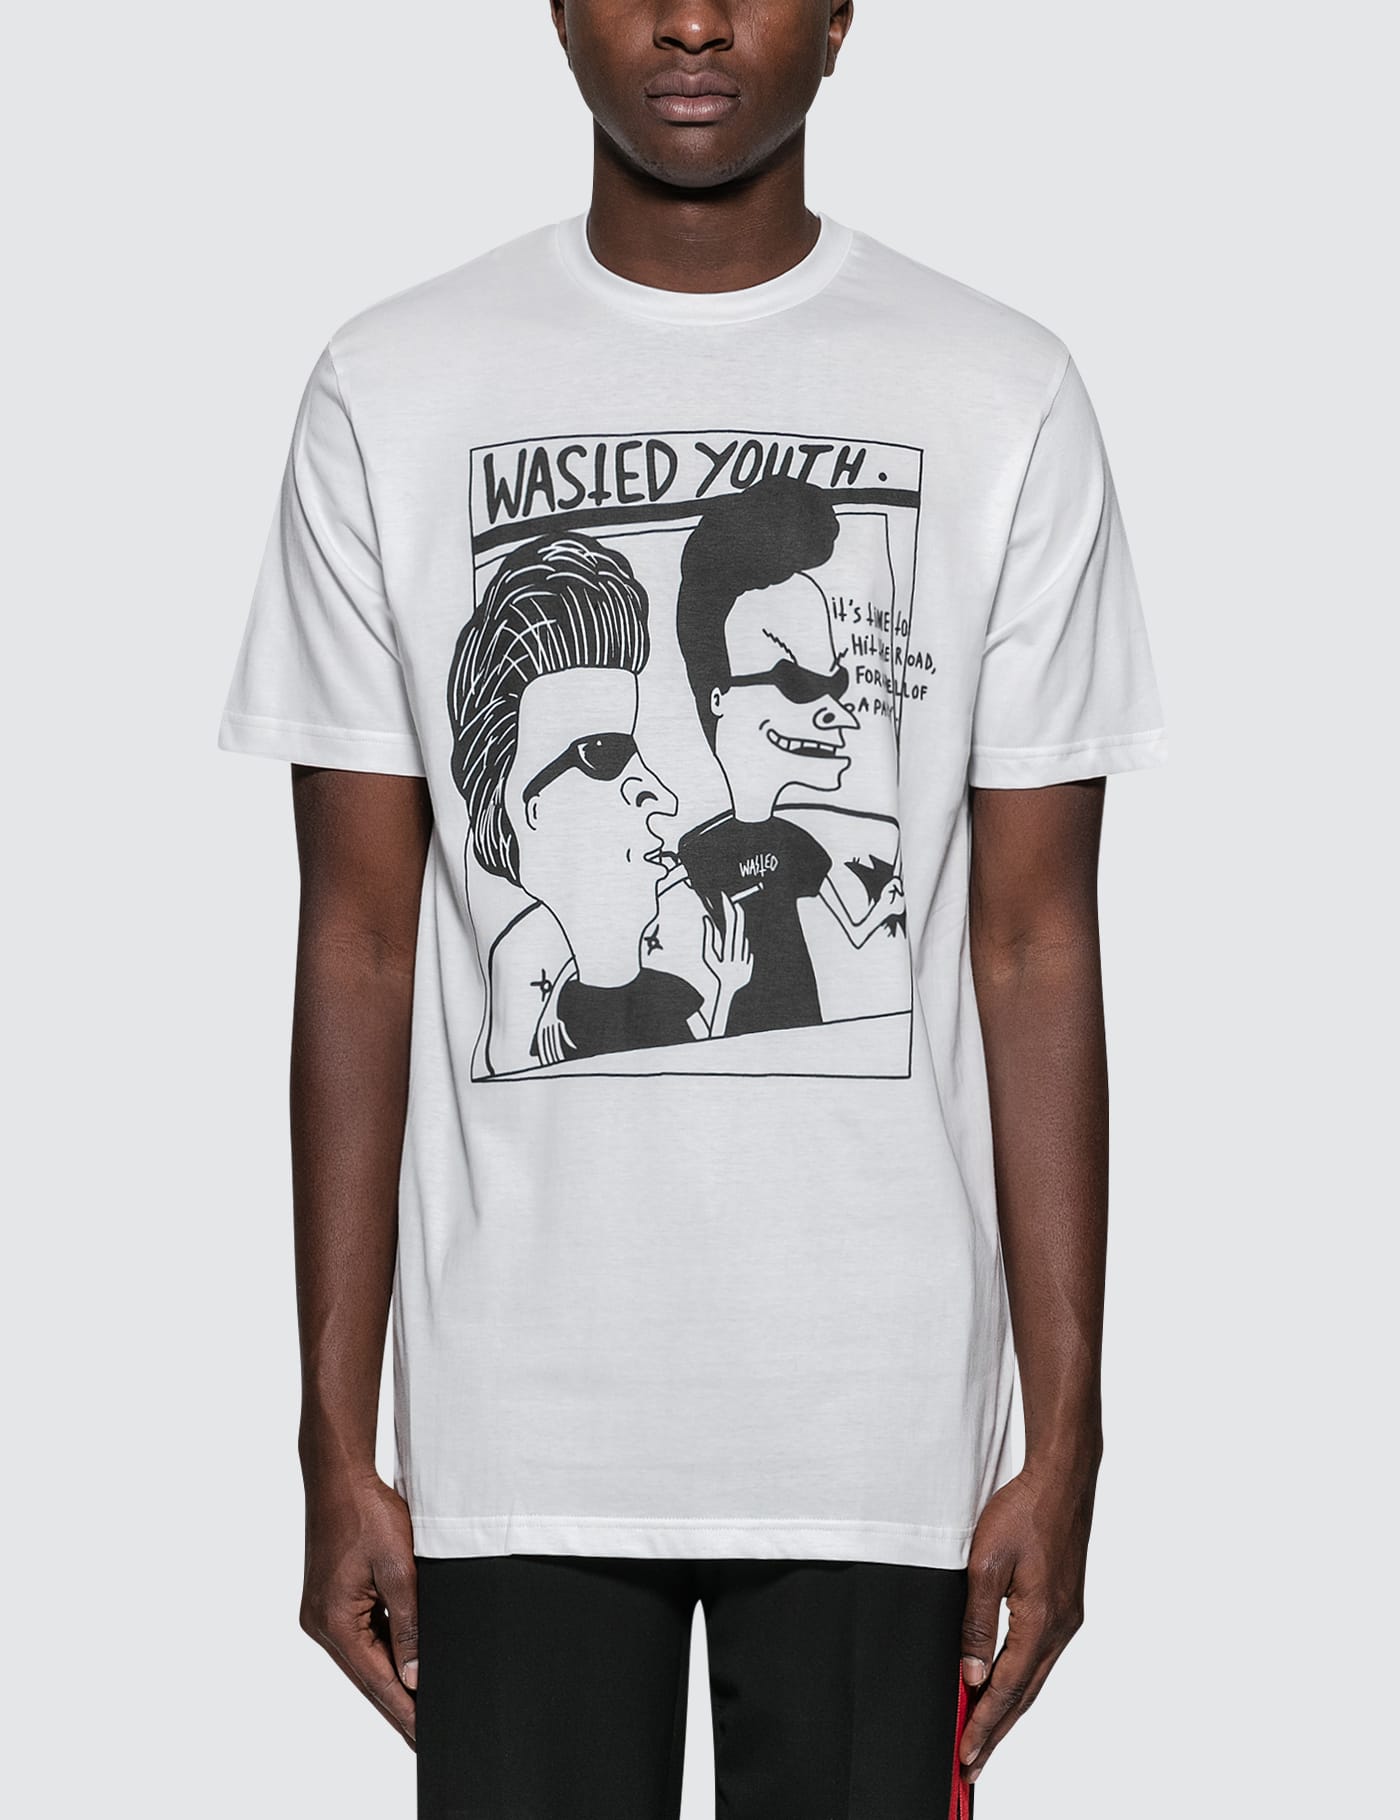 Wasted Paris - Wasted Youth T-Shirt | HBX - Globally Curated